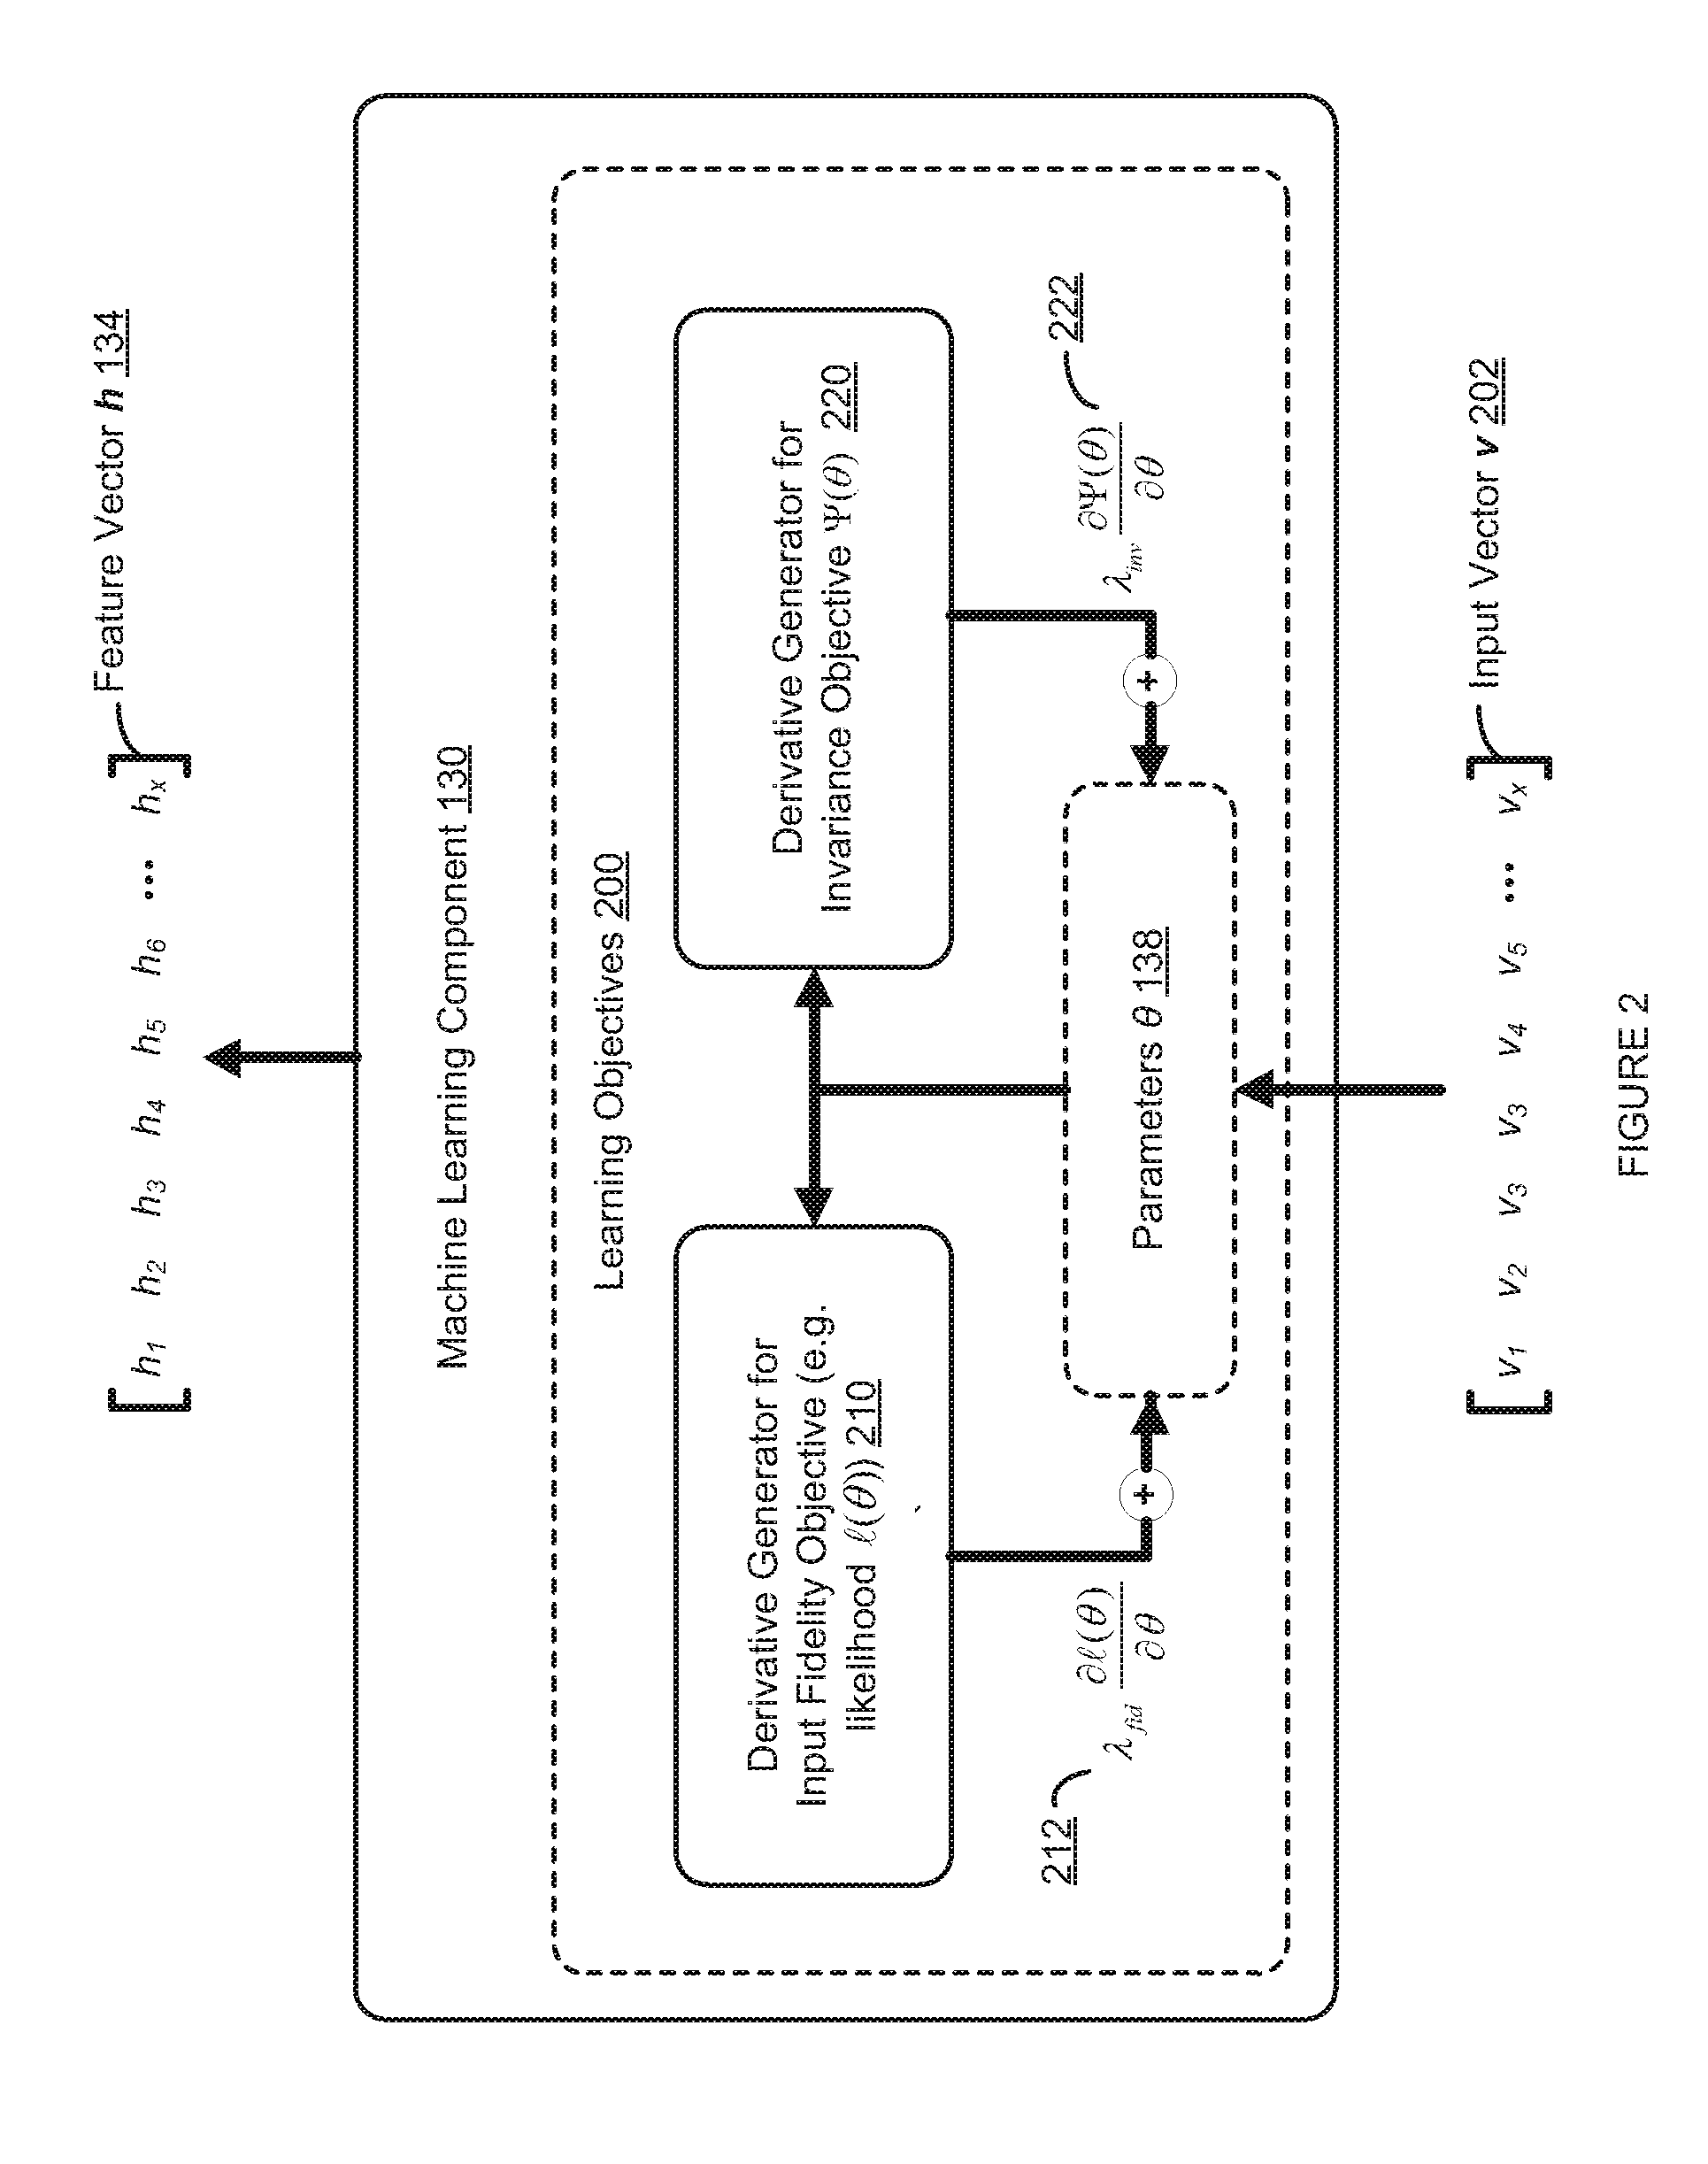 Method and System for Invariant Pattern Recognition